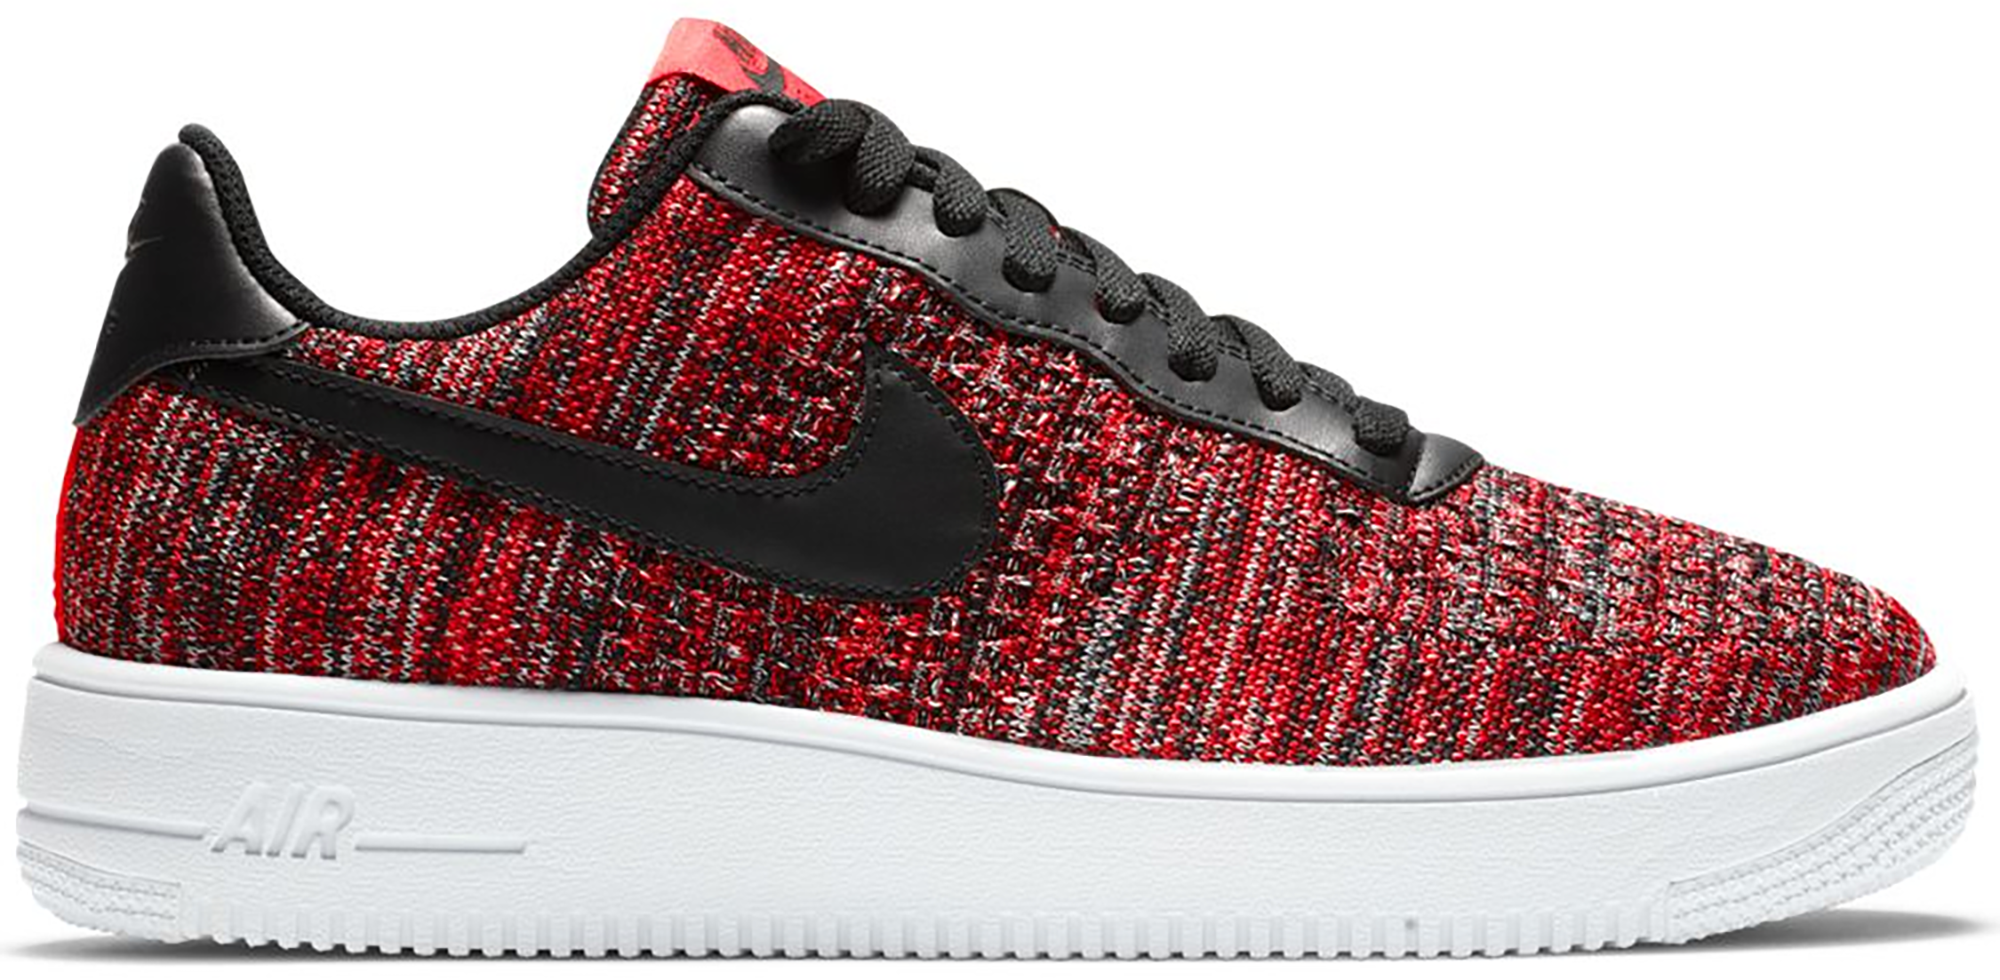 nike air force 1 flyknit low red